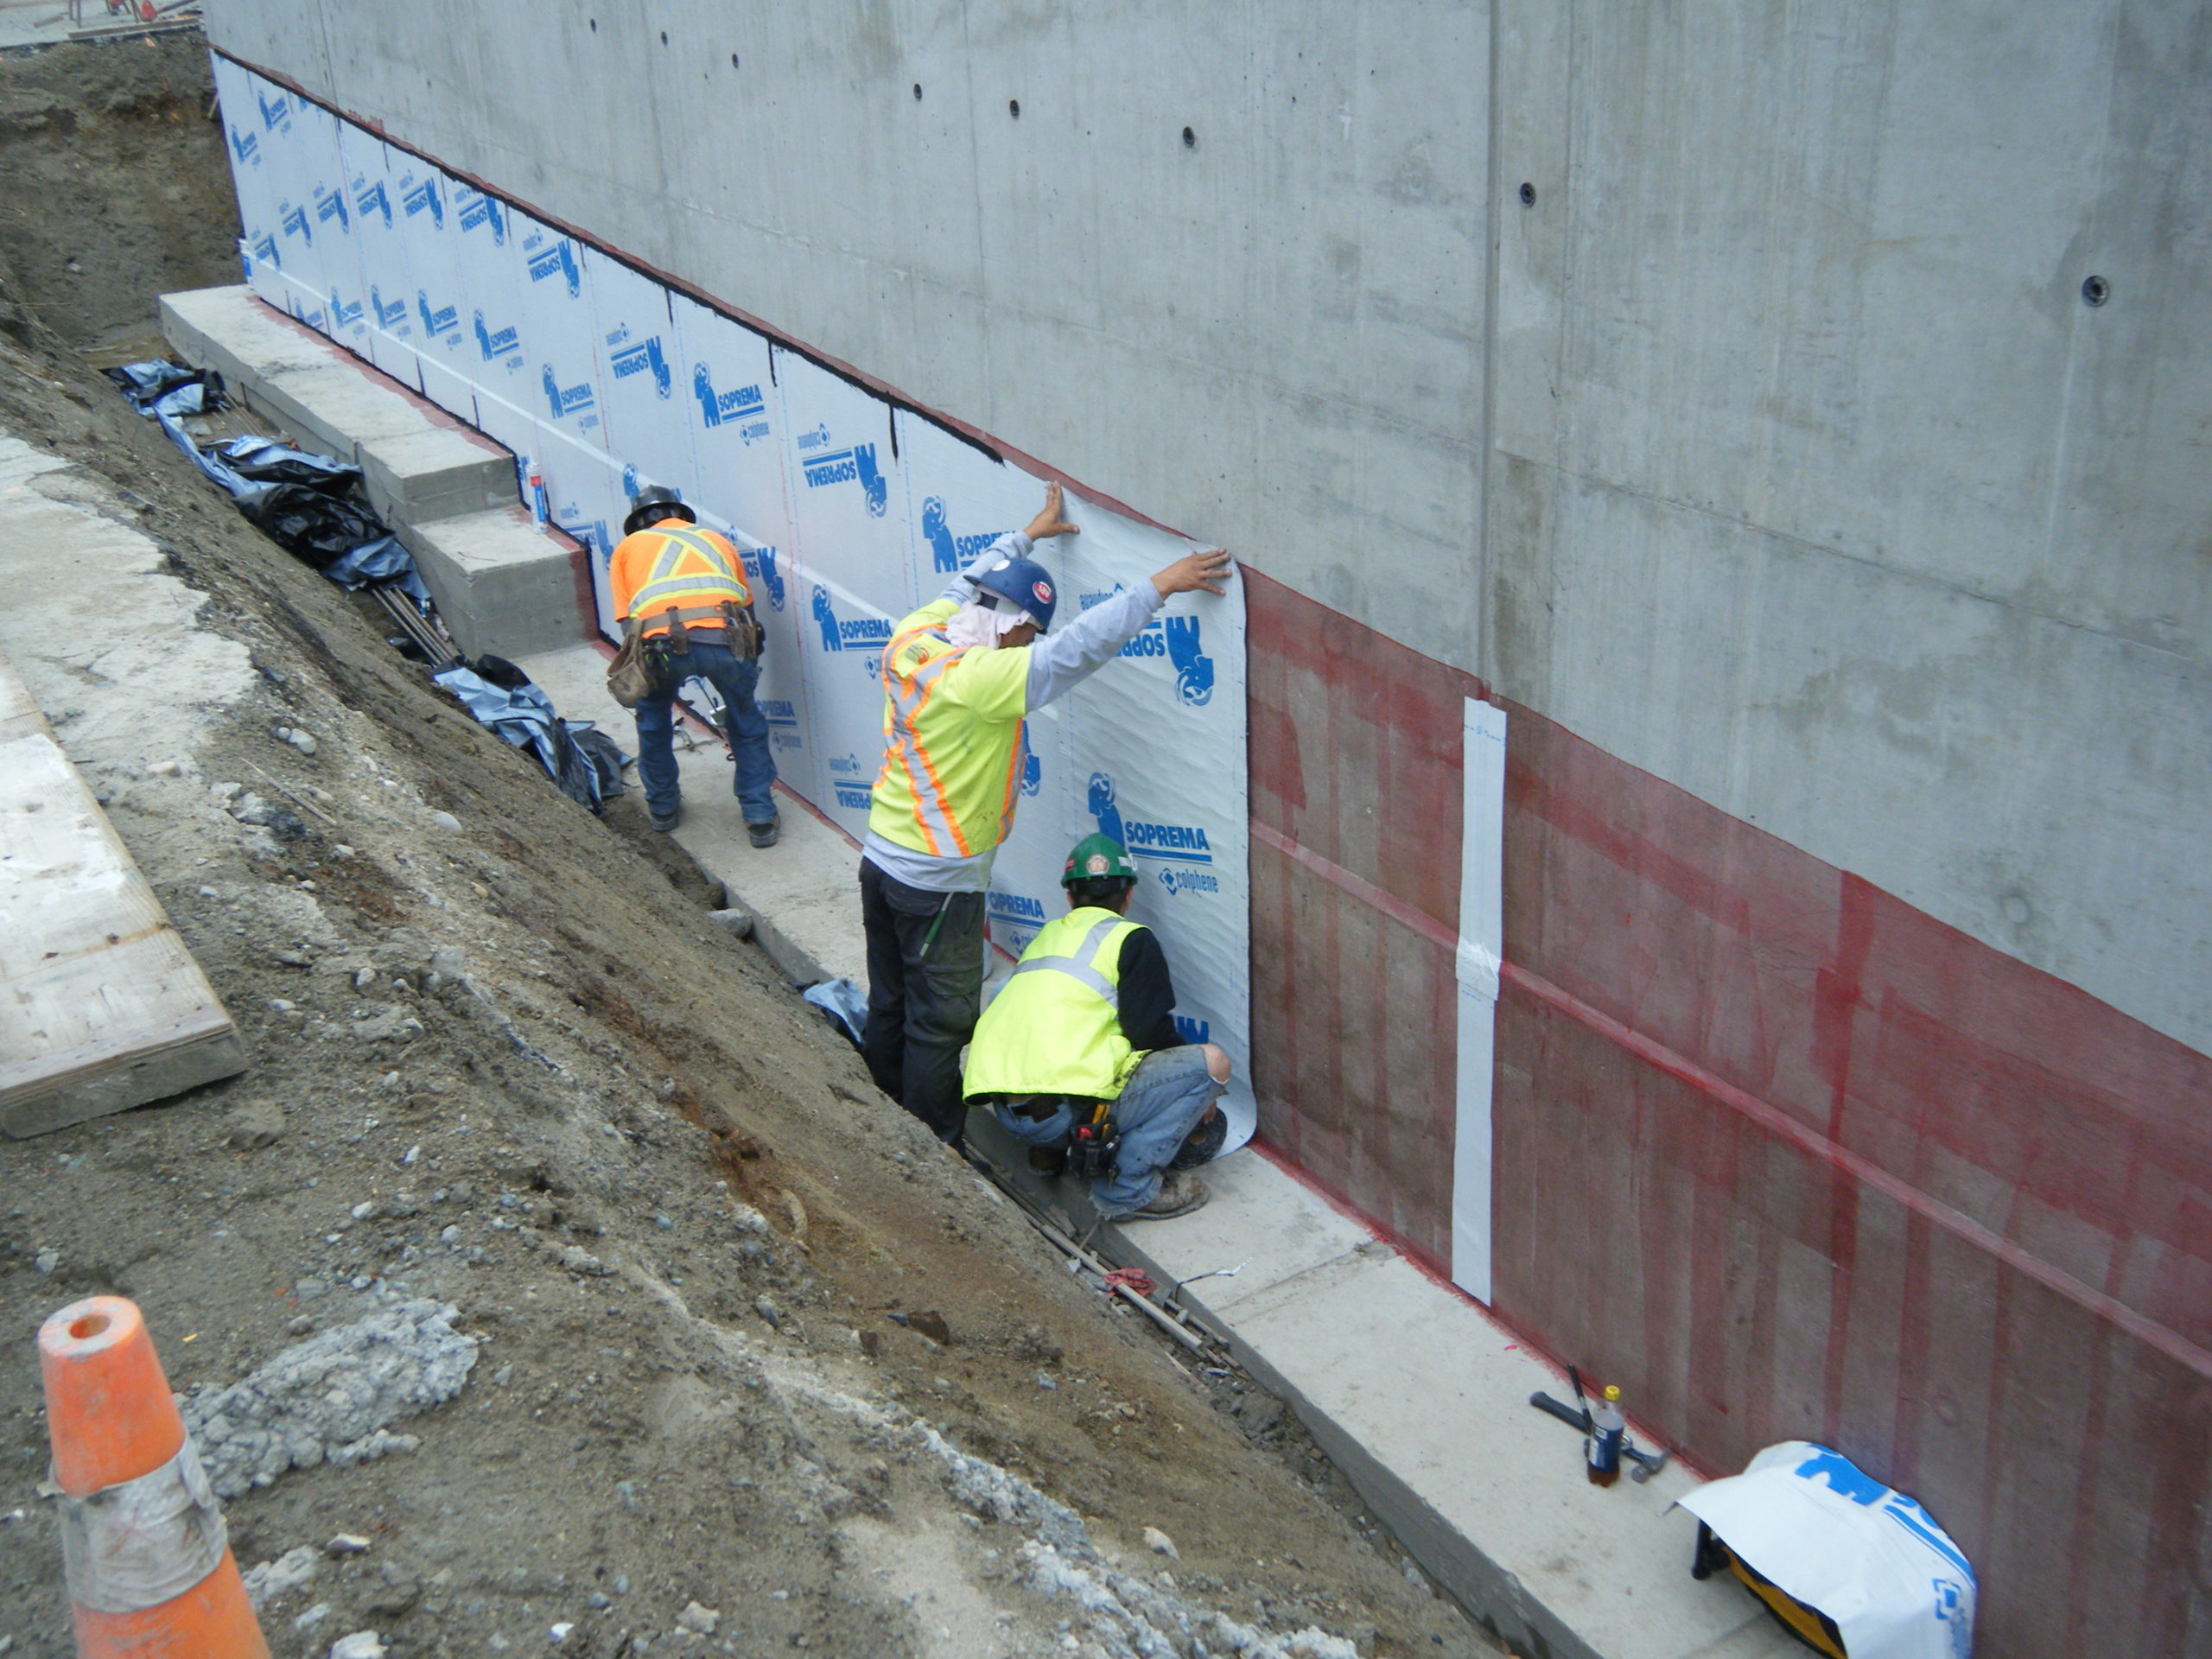 Some construction workers are applying a waterproofing membrane together.